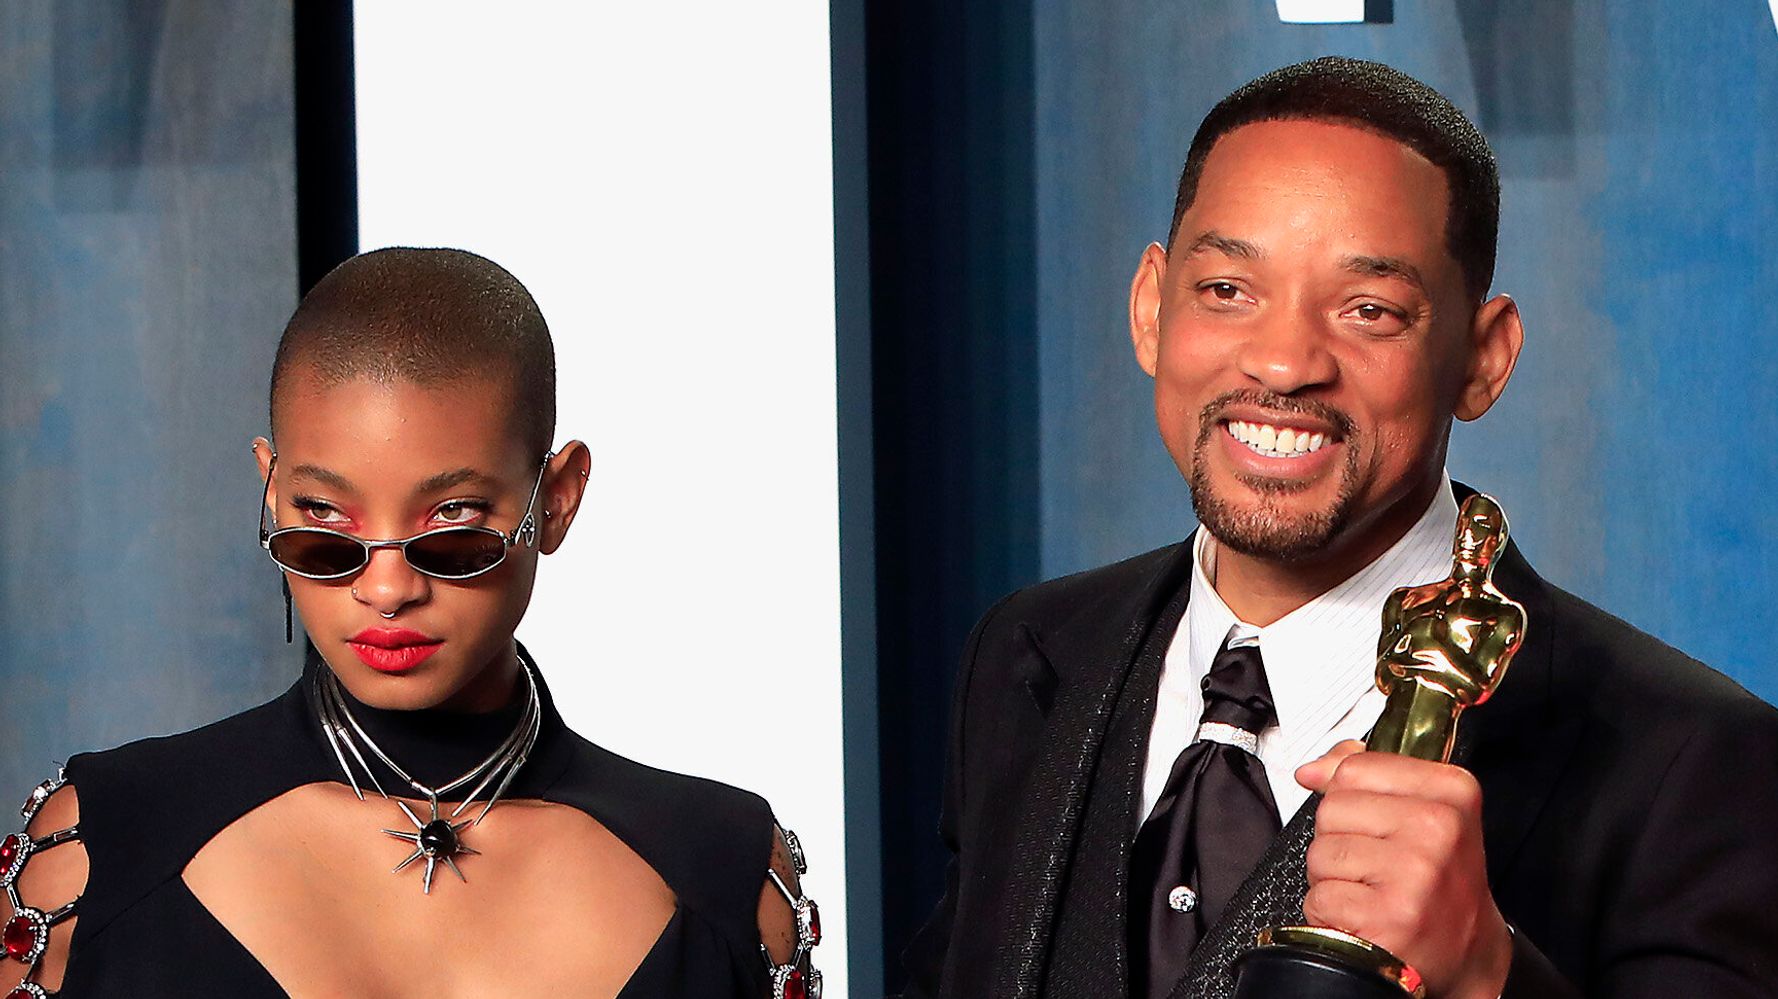 Willow Smith Explains Why Will Smith's Oscars Slap 'Didn't Rock' Her Too Badly - HuffPost